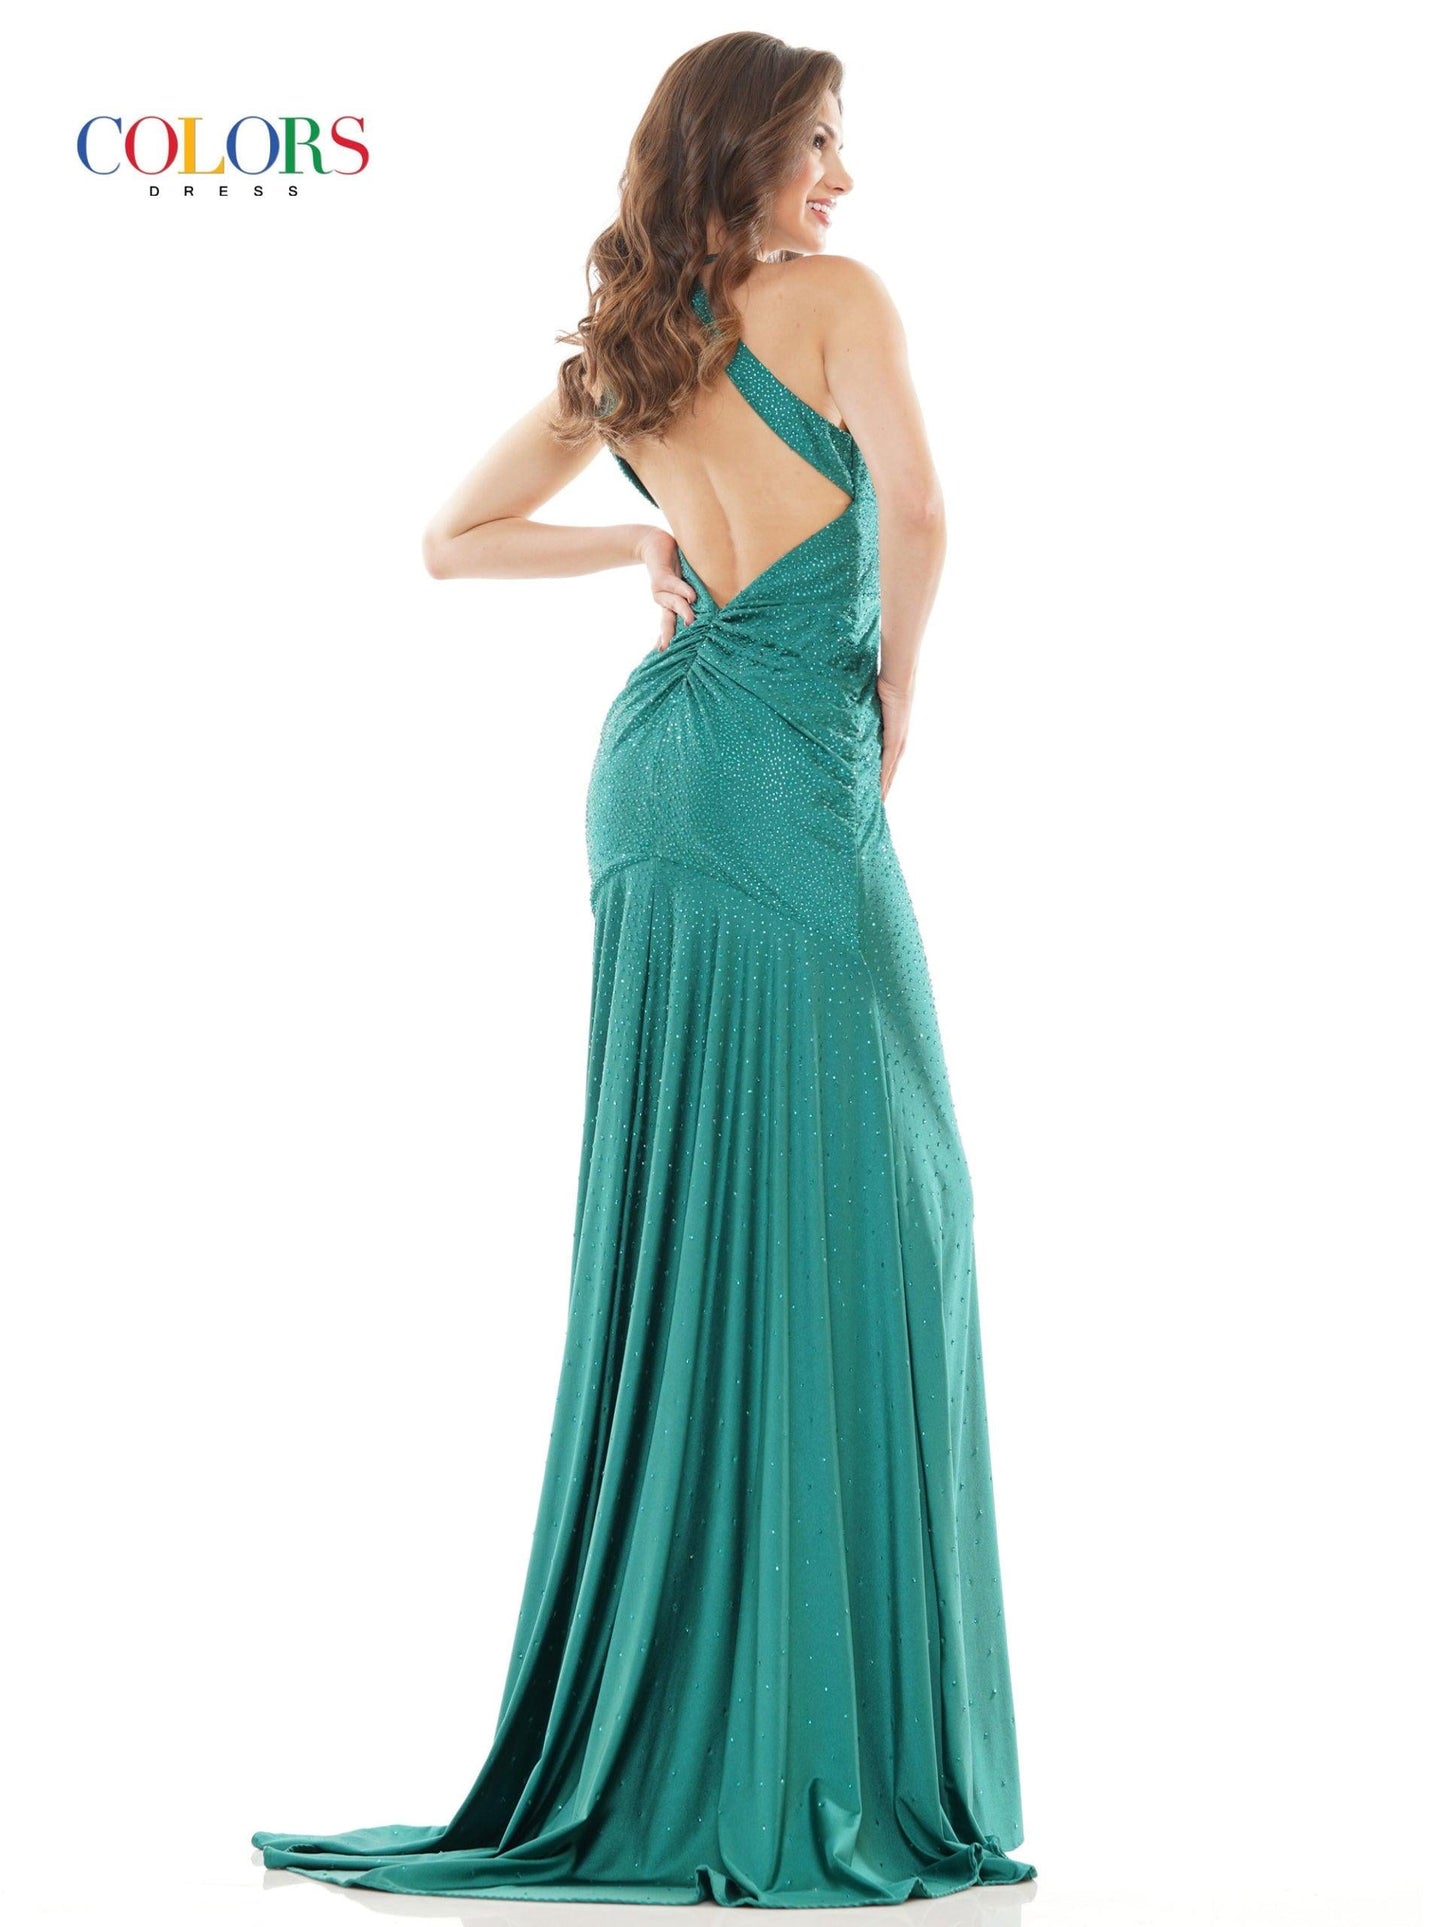 Colors Long Formal Beaded Halter Prom Dress 2658 - The Dress Outlet